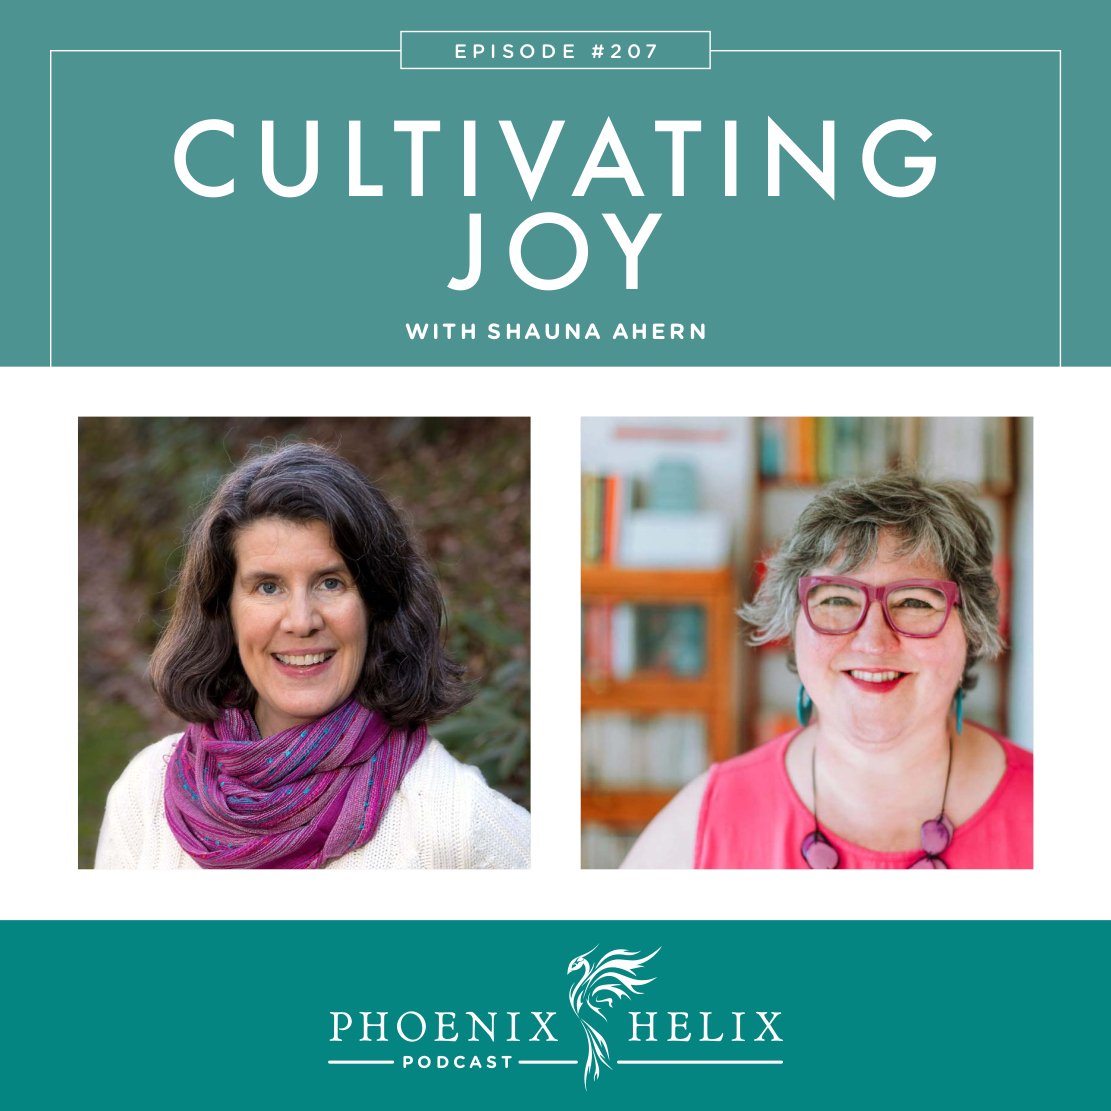 Cultivating Joy with Shauna Ahern | Phoenix Helix Podcast